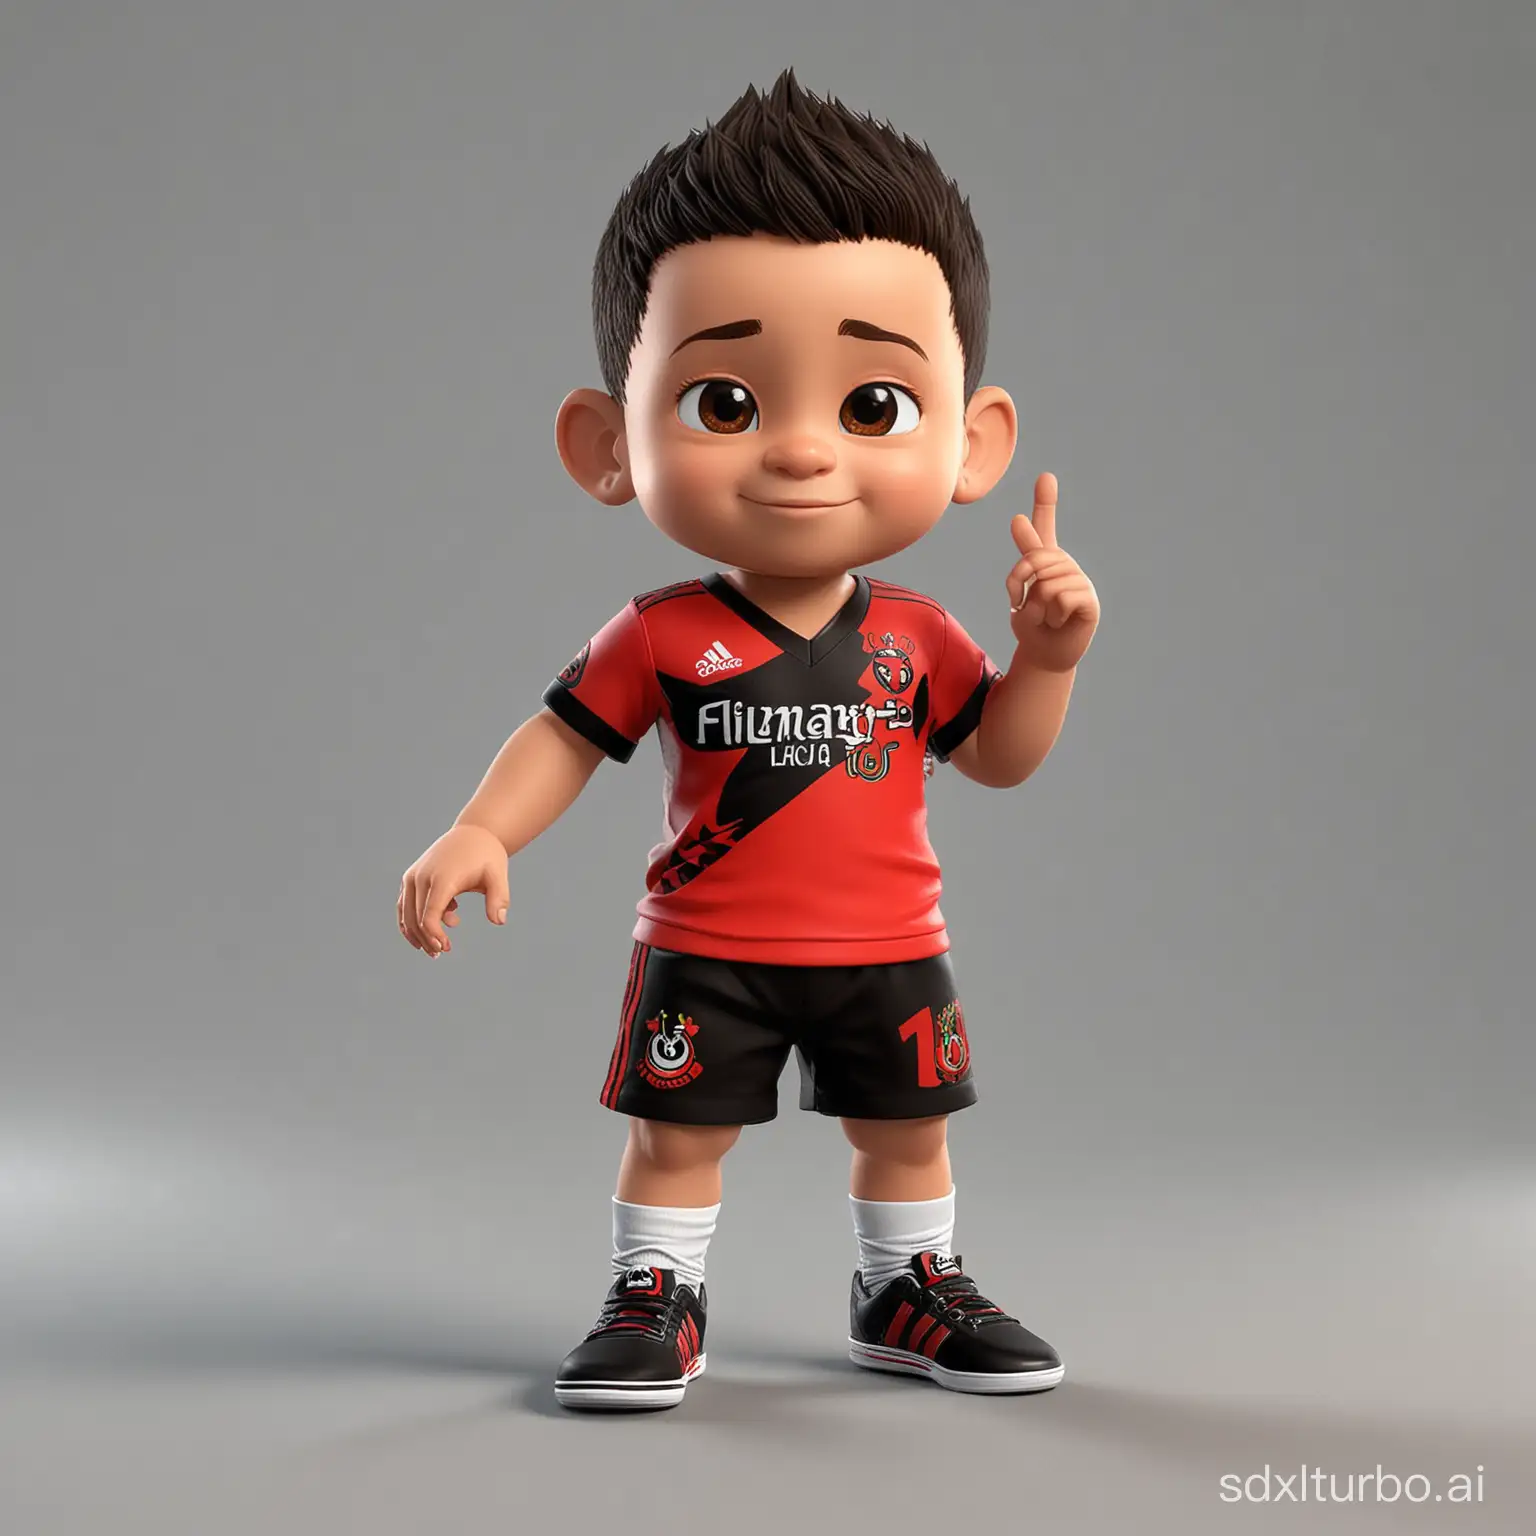 3D MASCOTTE Indonesian baby boy BODY SIMPLE FOR COMPLEMENT FLAMENGO tshirt  and shoes